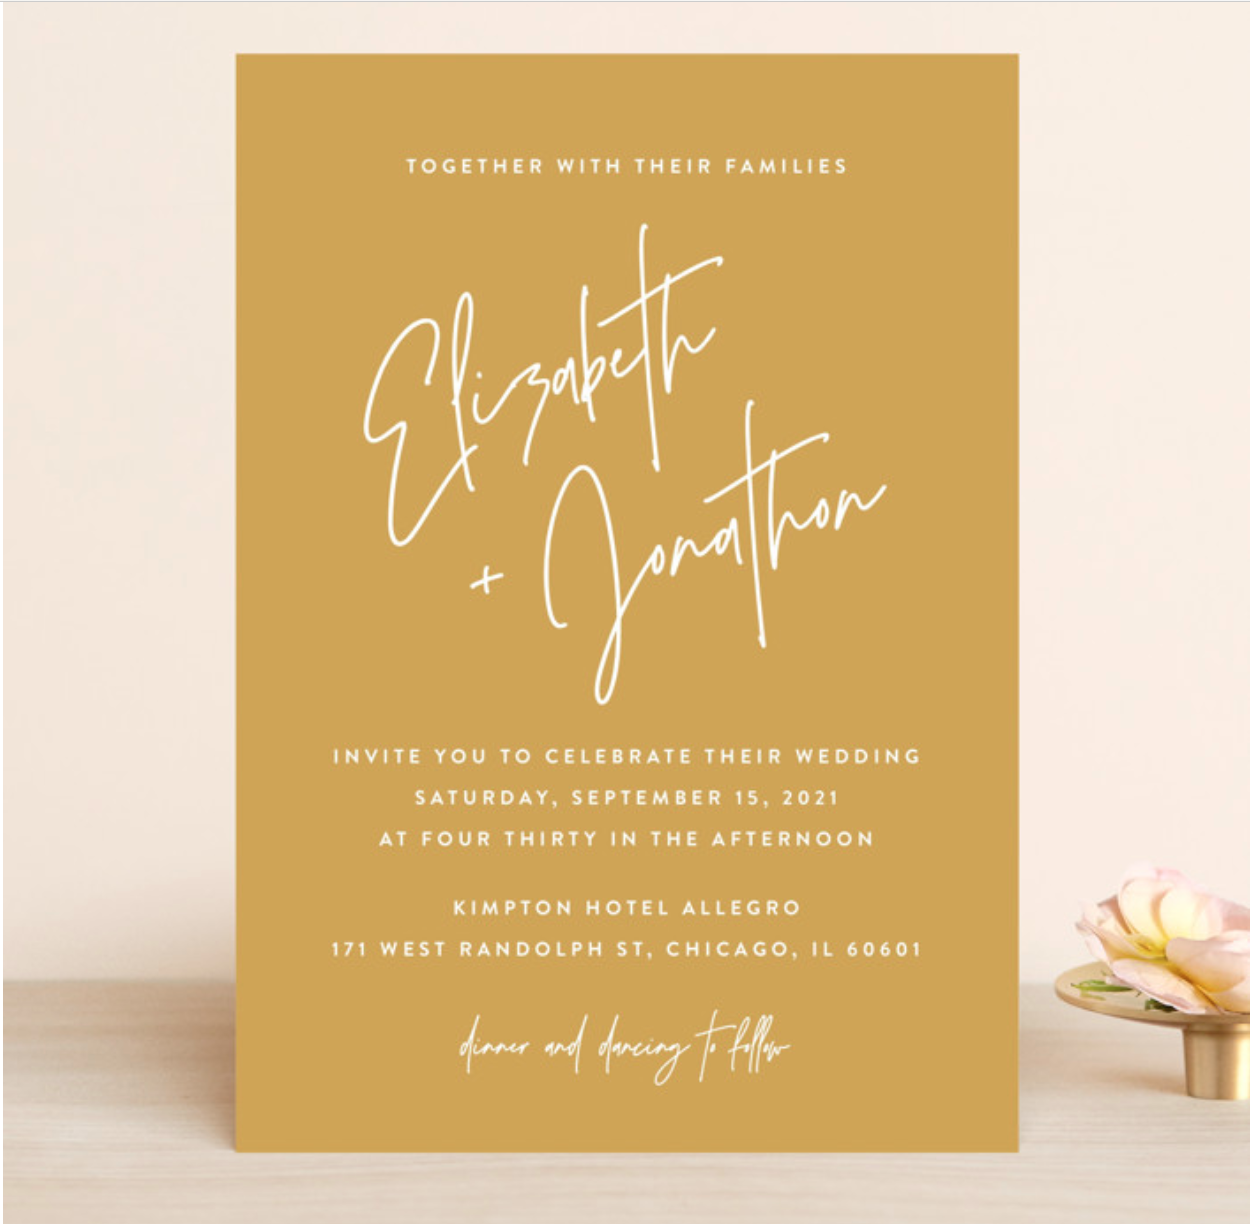 Mustard yellow wedding invite with white font